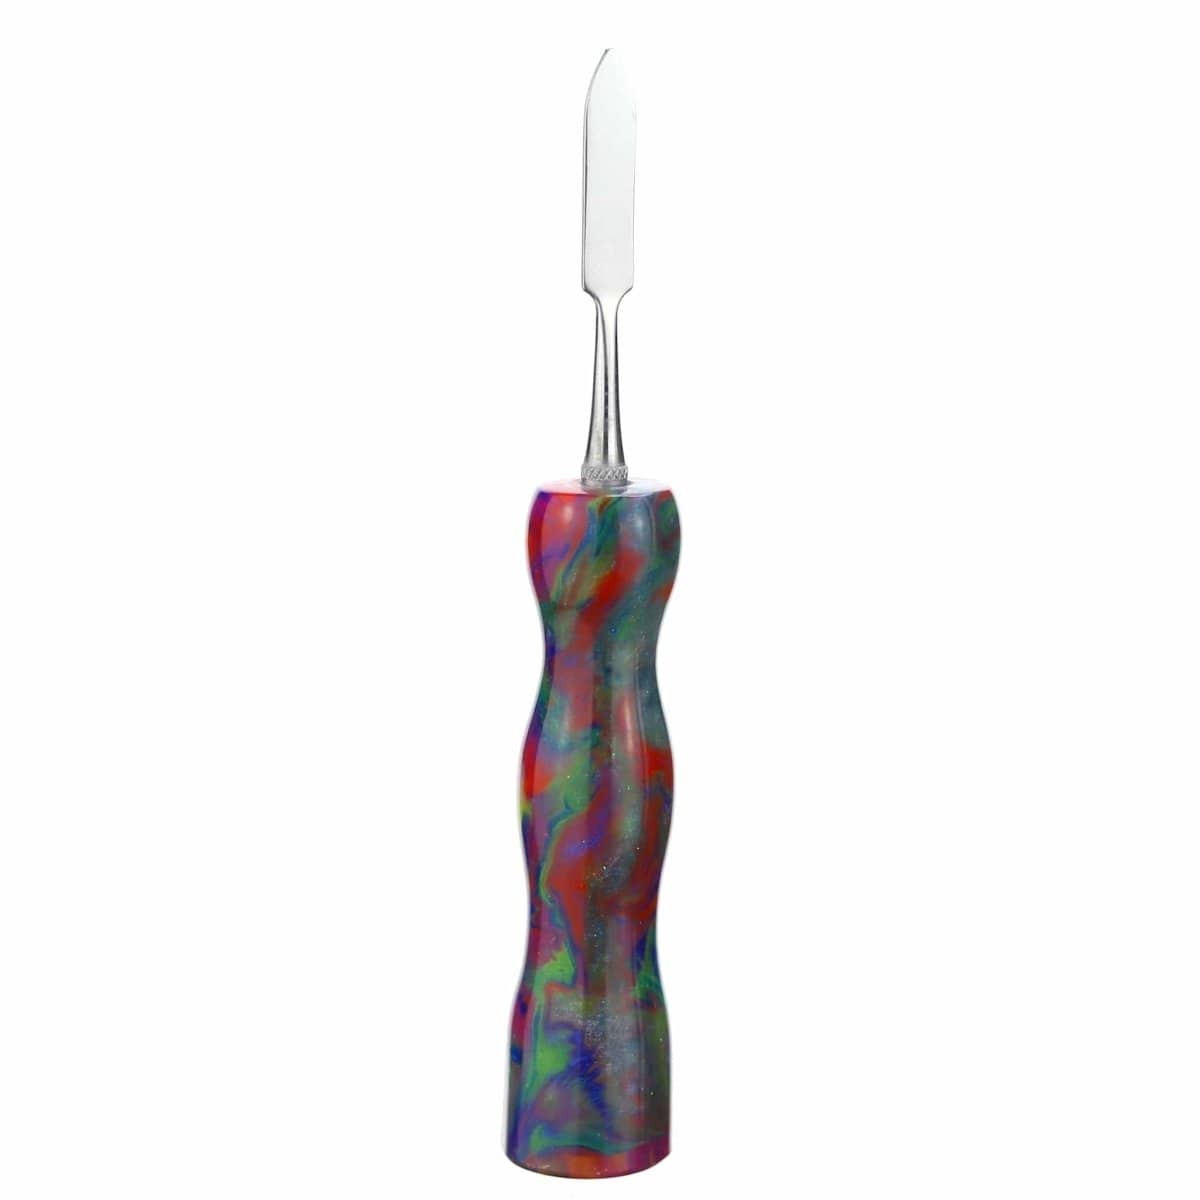 Galactic Crafts Accessory Design 2- Pointed Space Daze Resin Dab Tool